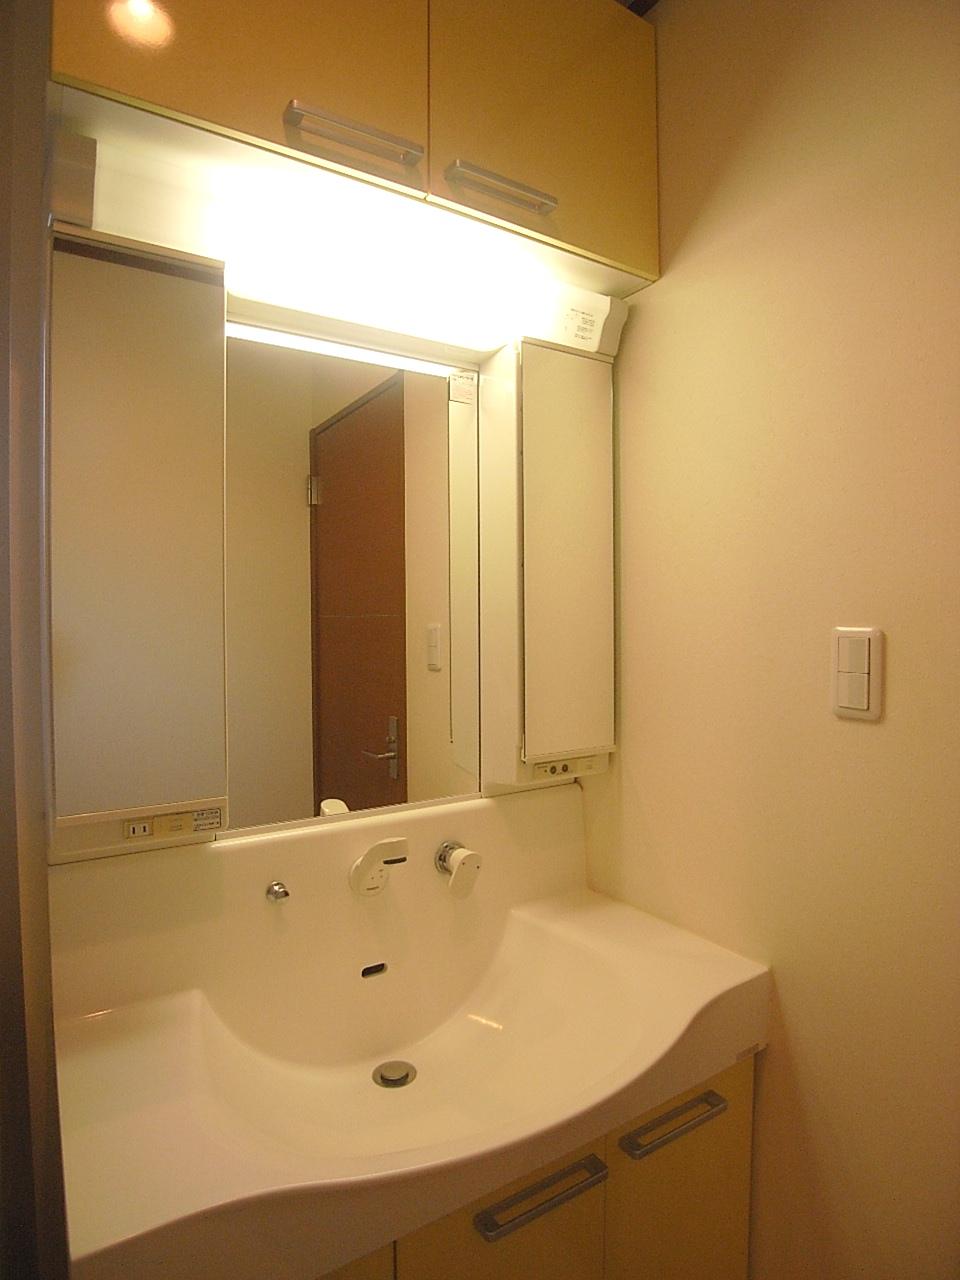 Wash basin, toilet. Three-sided mirror with vanity ※ (December 2013) Shooting